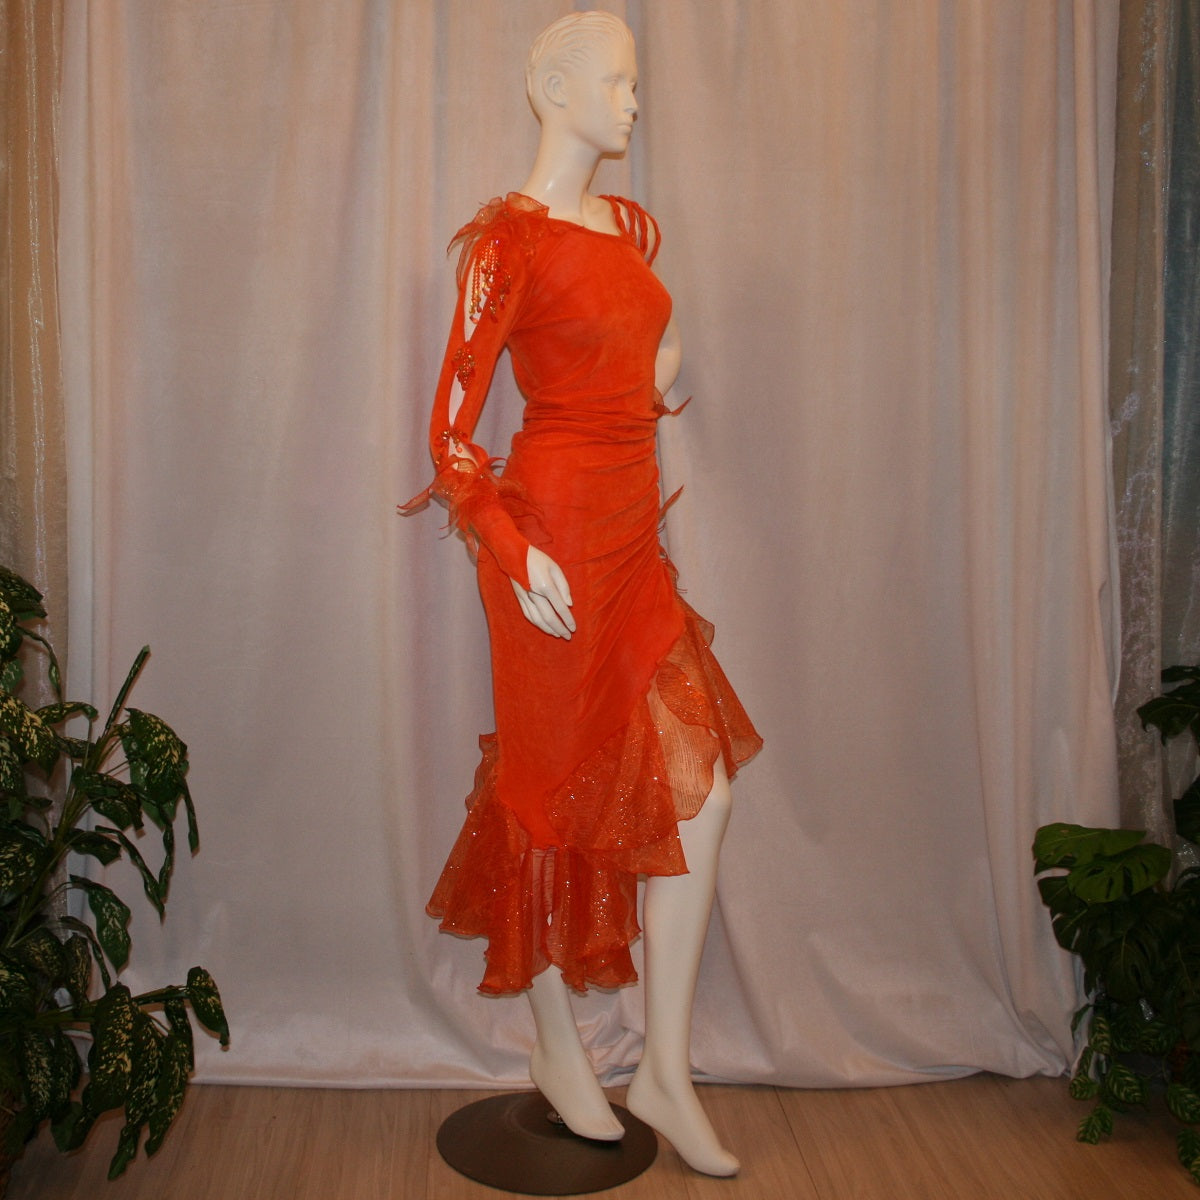 Crystal's Creations right side view of Orange Latin/rhythm dress was created in luxurious orange solid slinky with oodles of glitter organza flounces & accents, embellished with a touch of Swarovski hand beading.